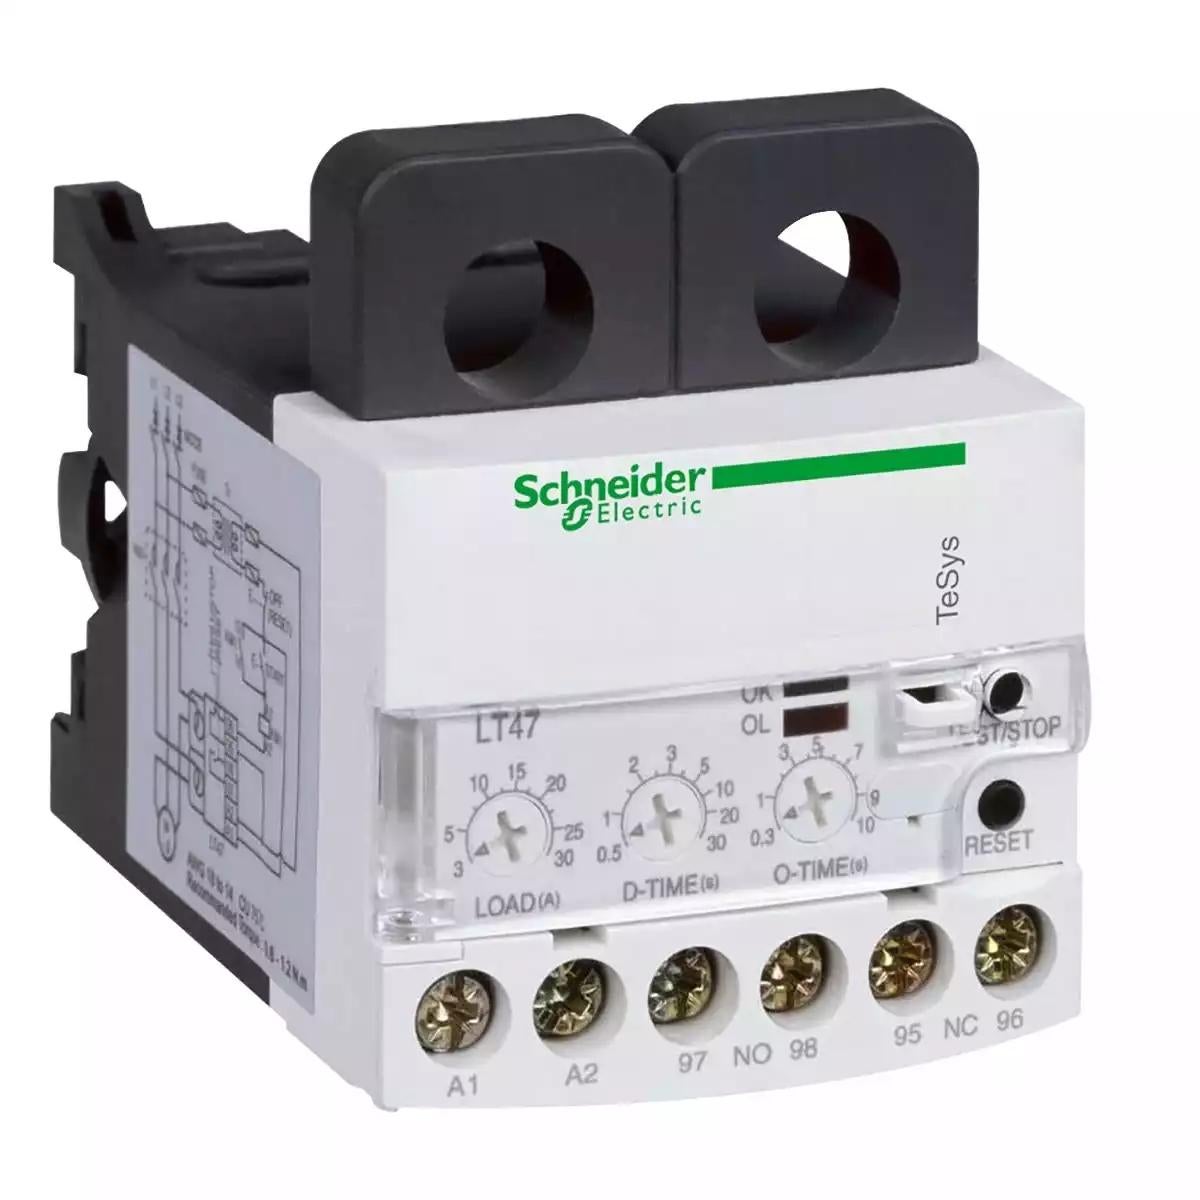 Schneider Electric TeSys LT47 electronic over current relays - manual - 5...60 A - 200...240 V AC